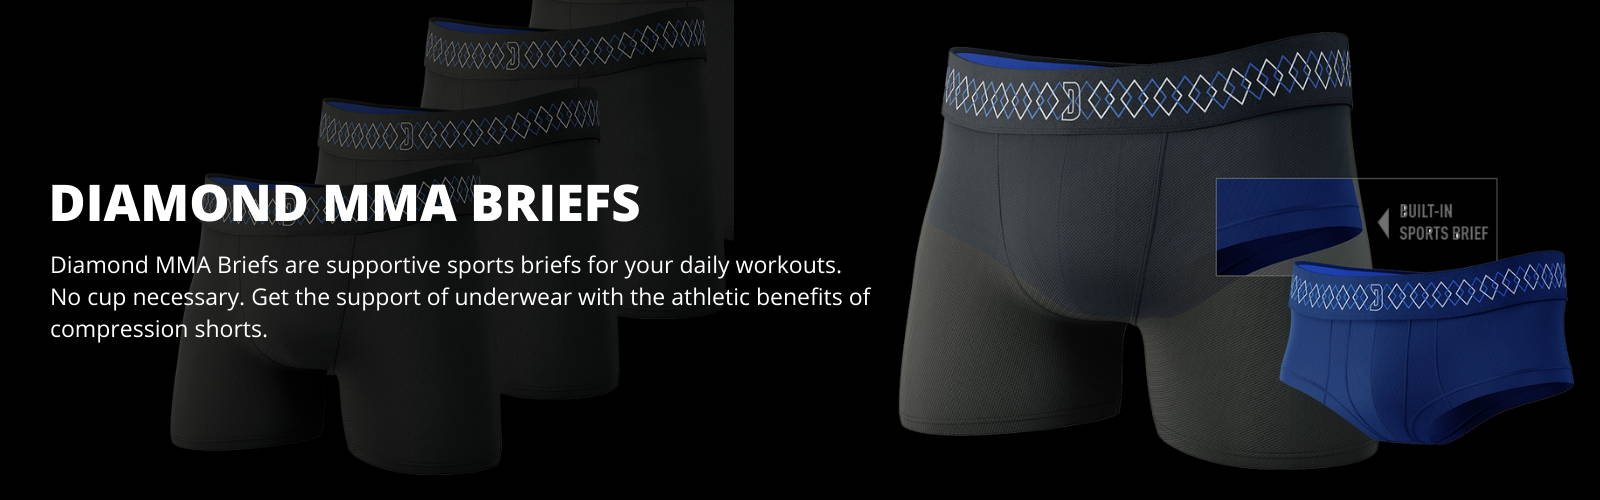 Athletic cups, jock straps, and shorts for high-impact athletes